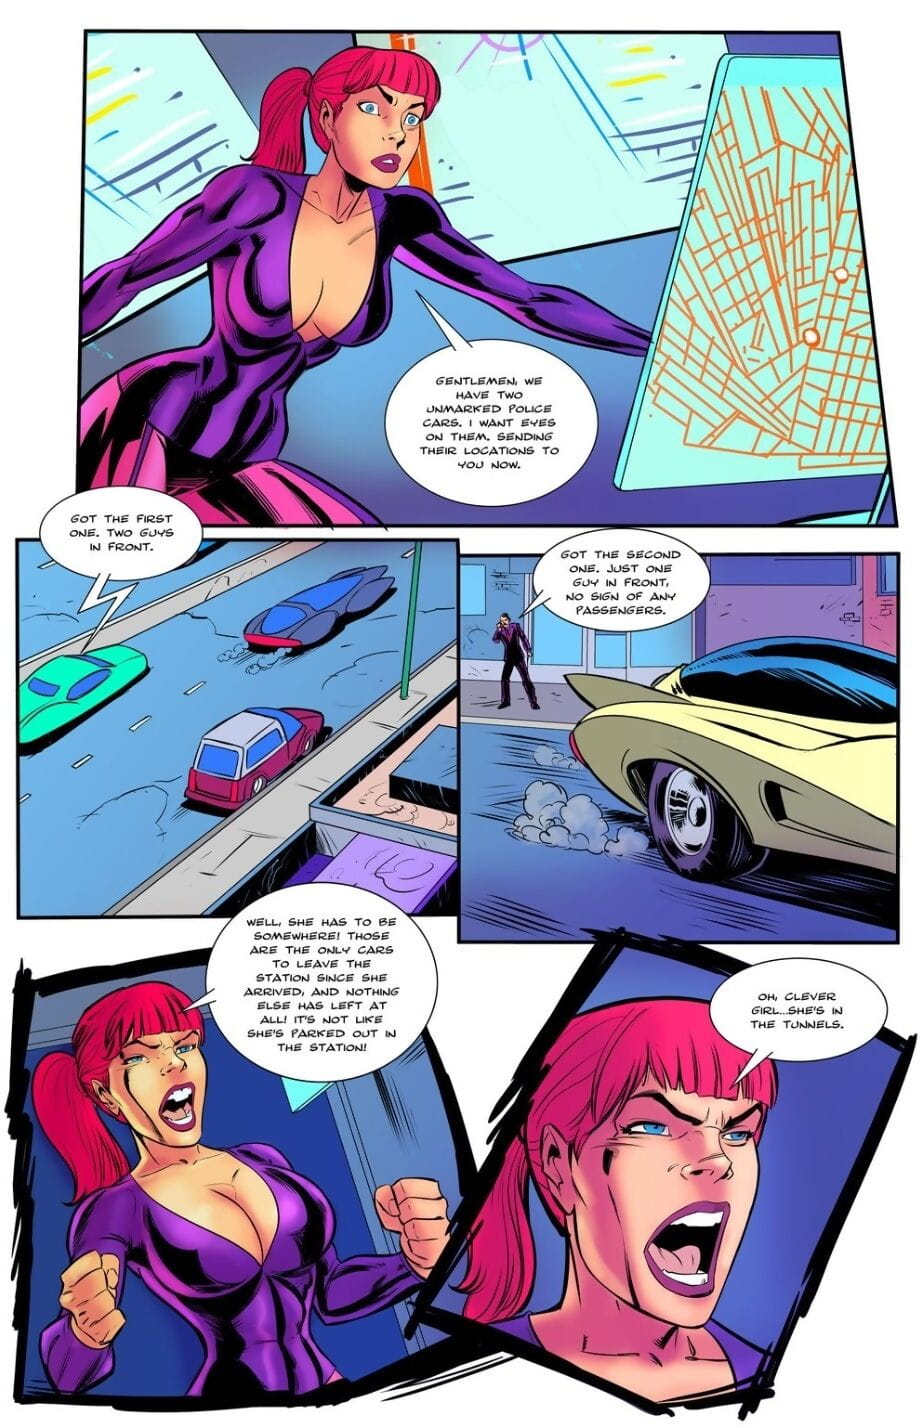 Bot- Giantess Fight Issue 2 page 1